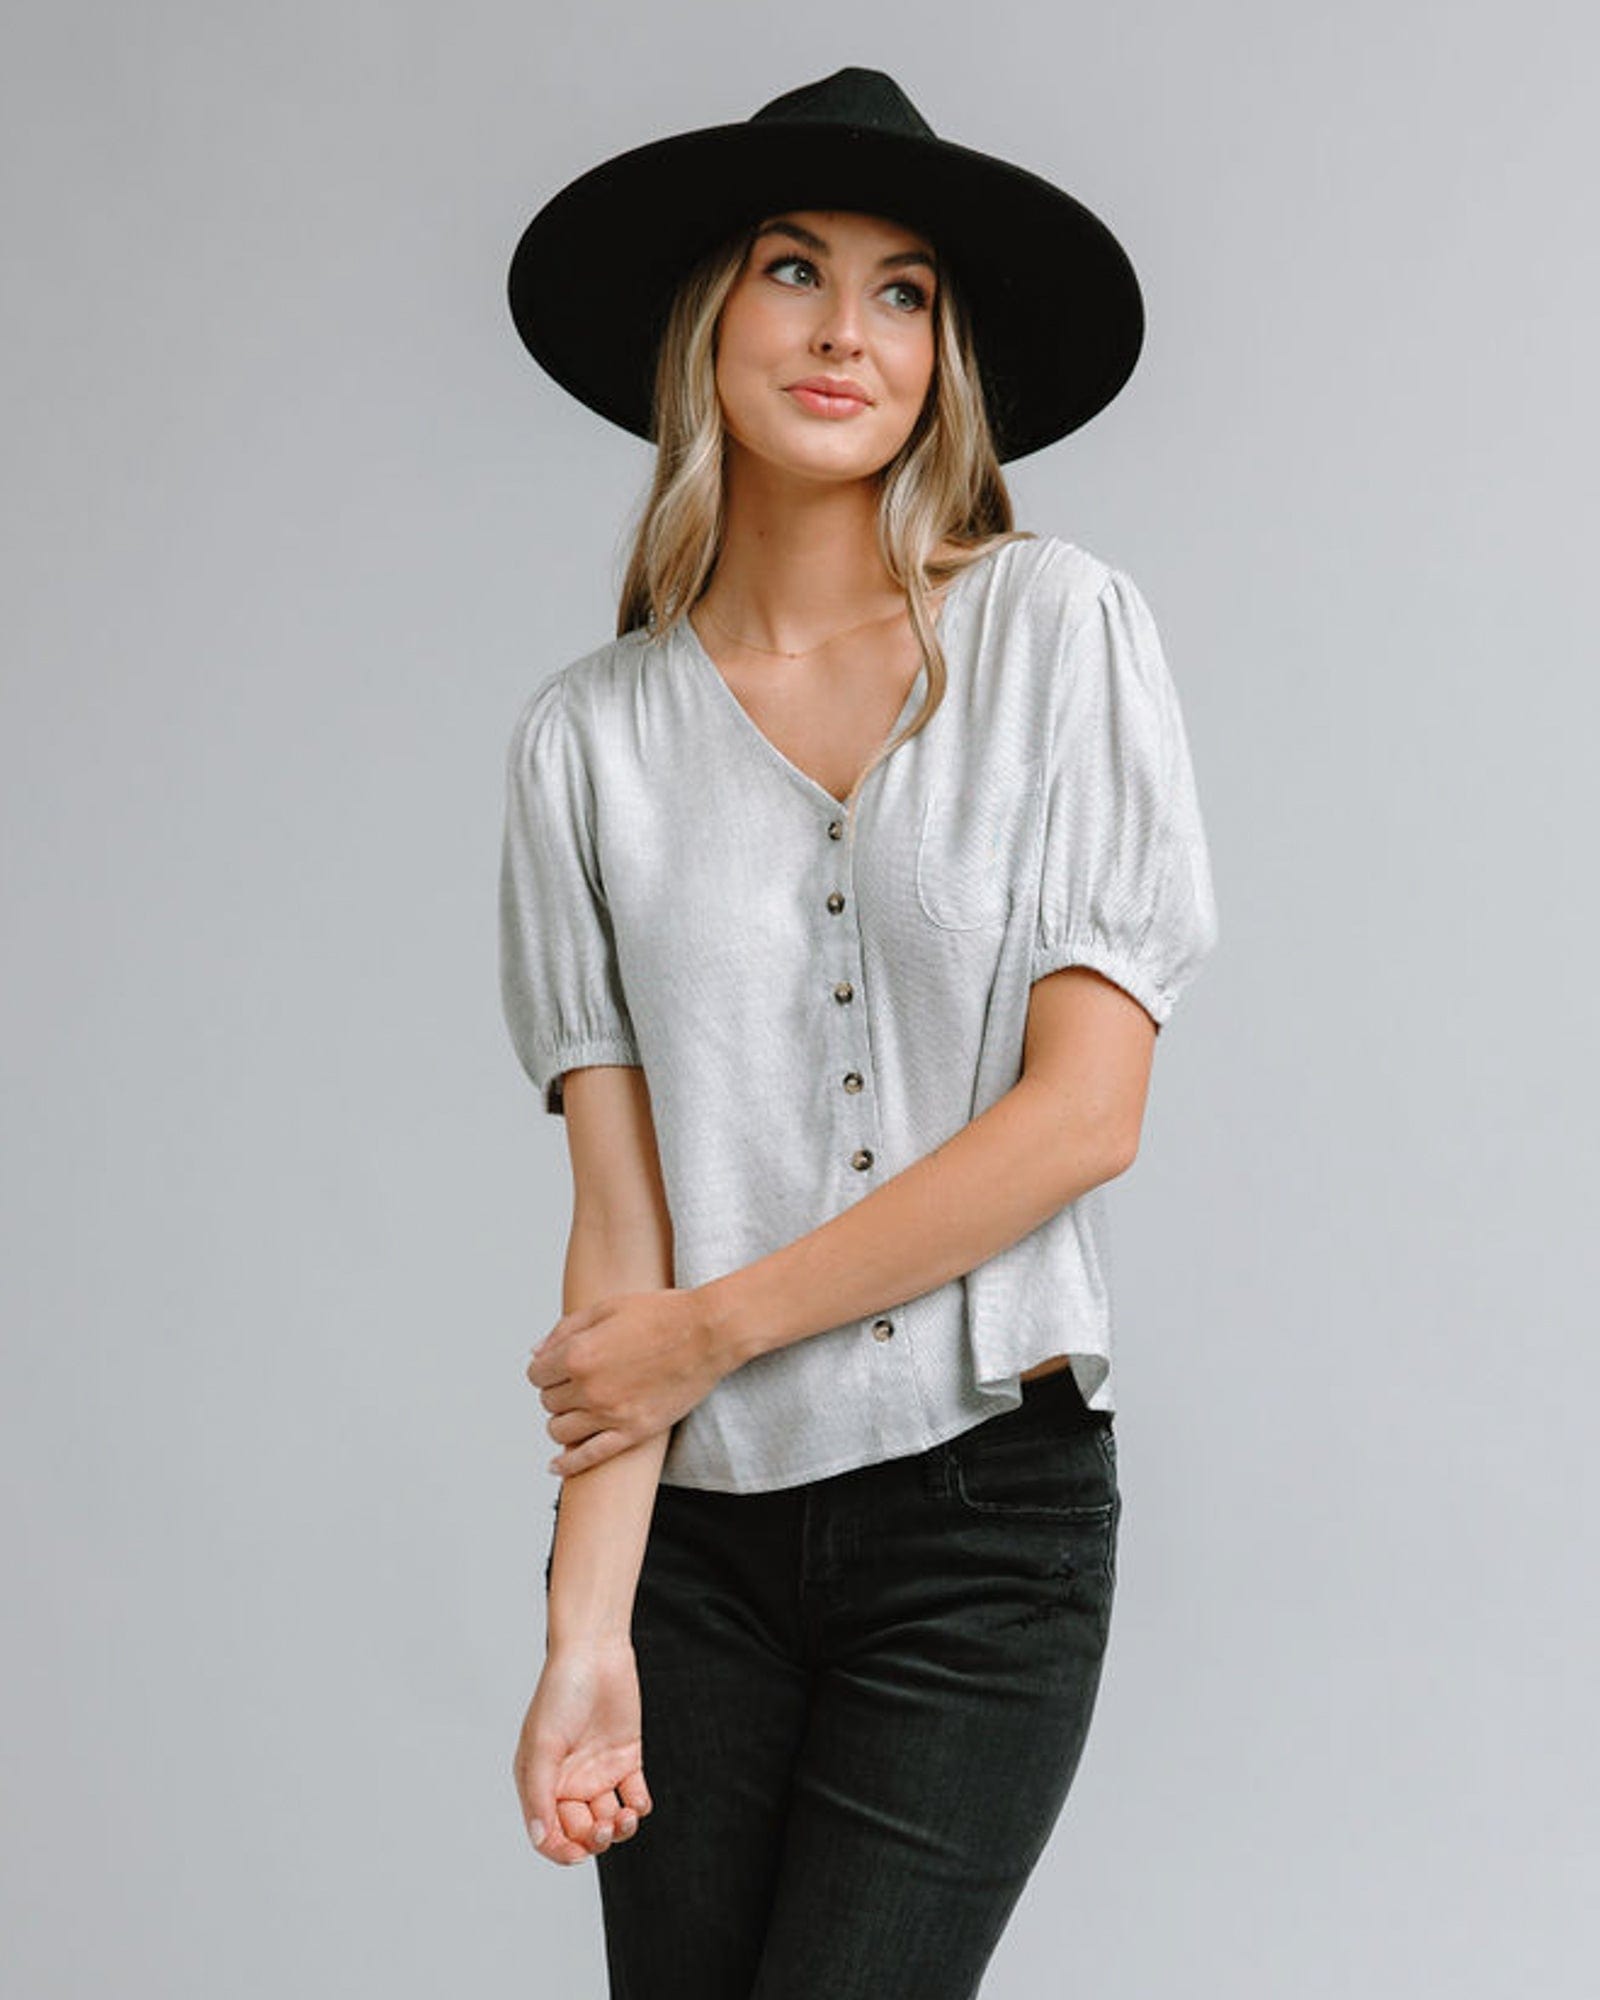 Woman in a short sleeve, v-neck blouse with front buttons